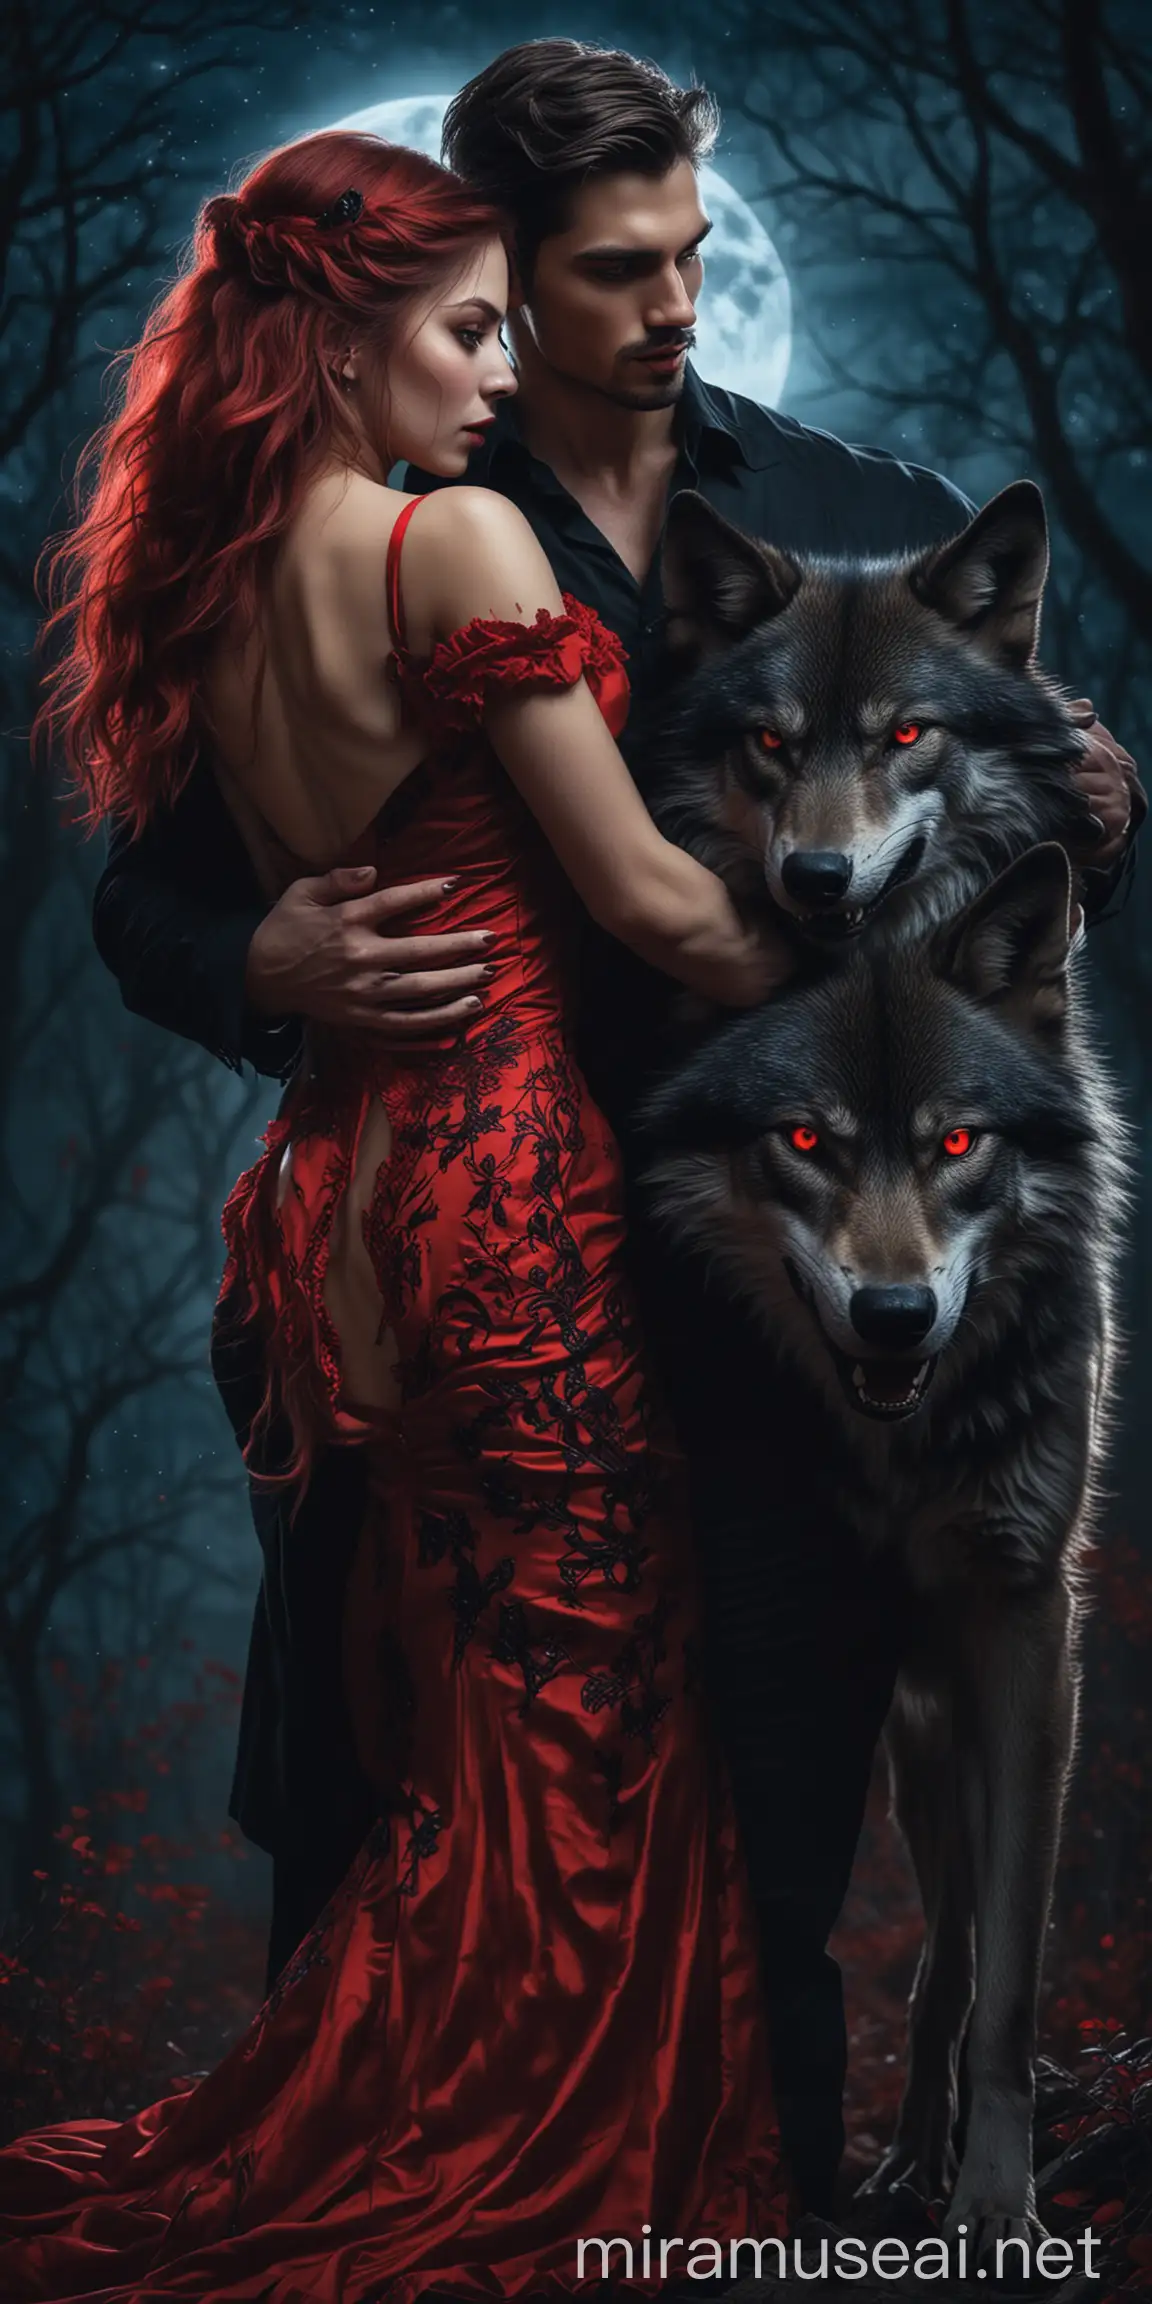 A beautiful lady in a red and black fitted dress, held romantically from behind by a handsome young muscular man with red eyes and fangs, in a luminous blue full moon night, and with a wolf beside the lady